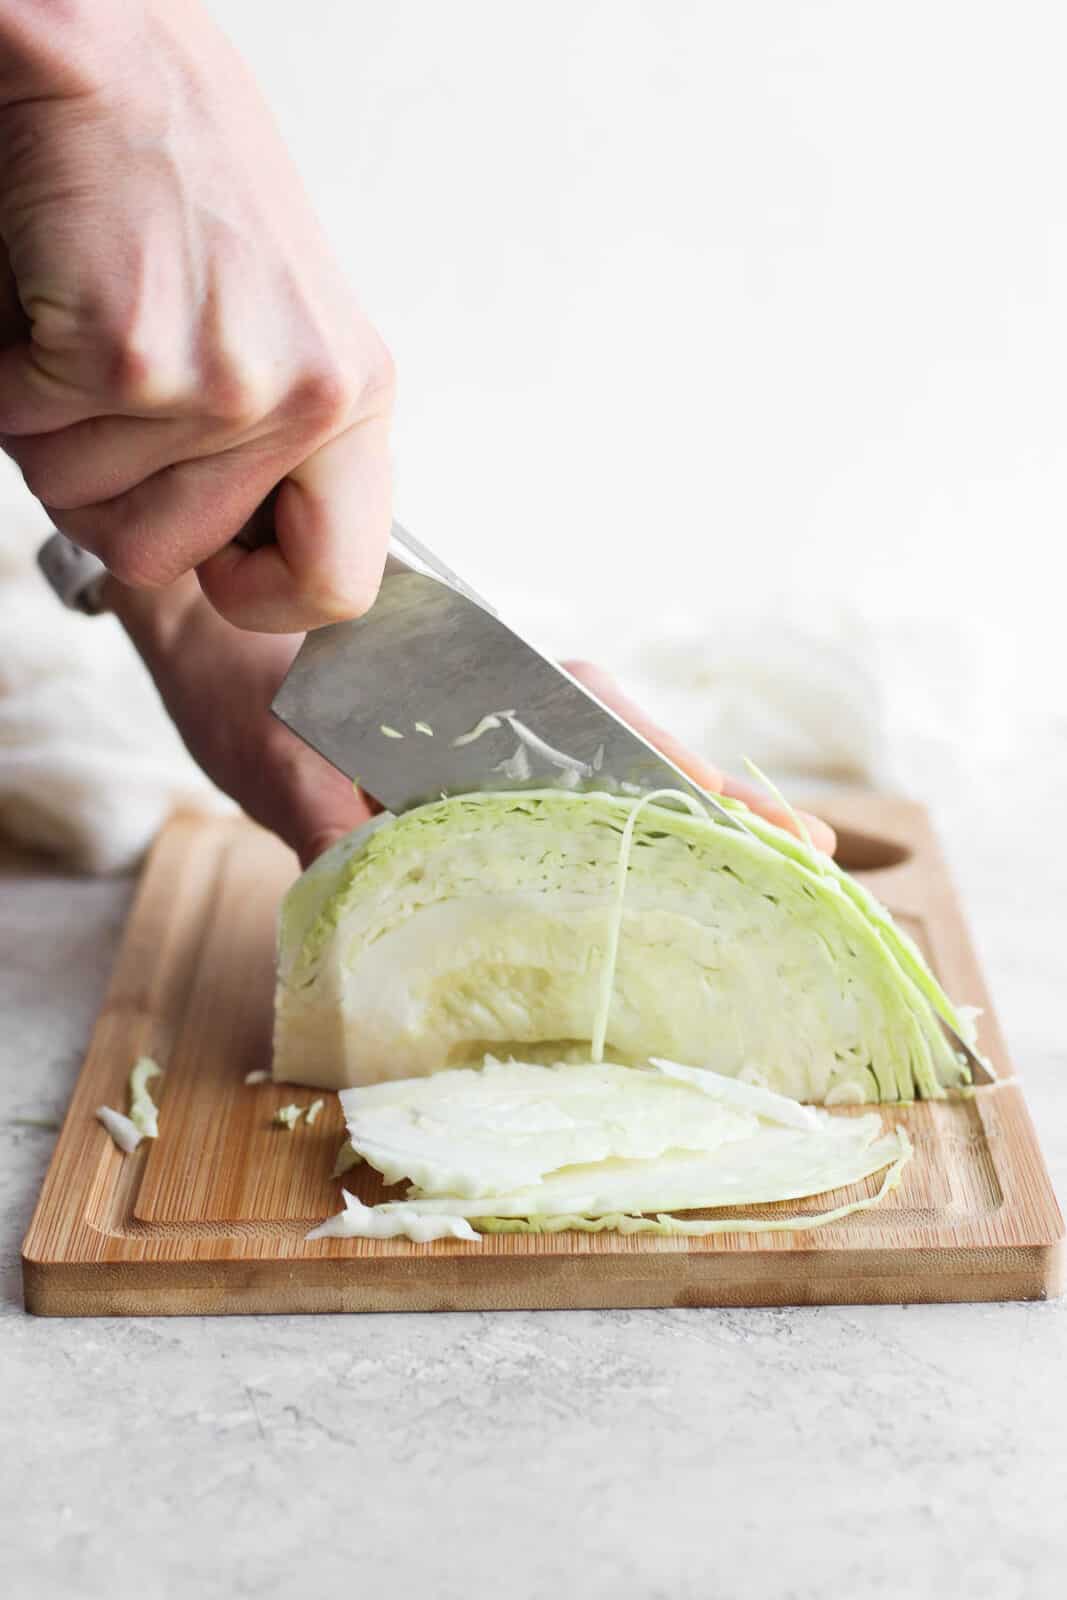 A large knife slicing the cabbage into thin strips.